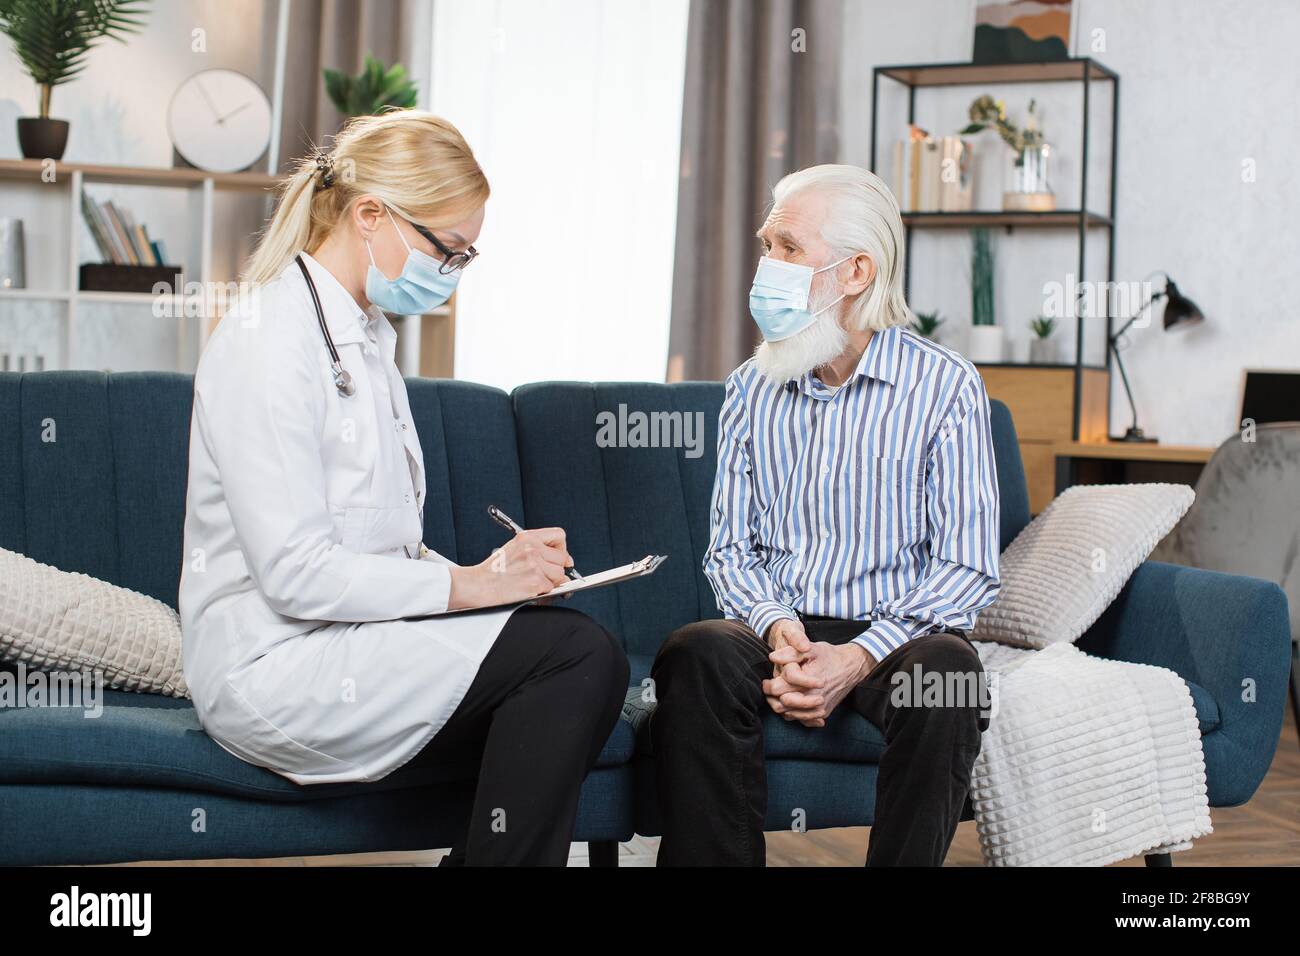 Mature woman doctor filling checkup form during home visit of retired bearded man patient, writing in documents, medical history or anamnesis, medical insurance contract. Stock Photo